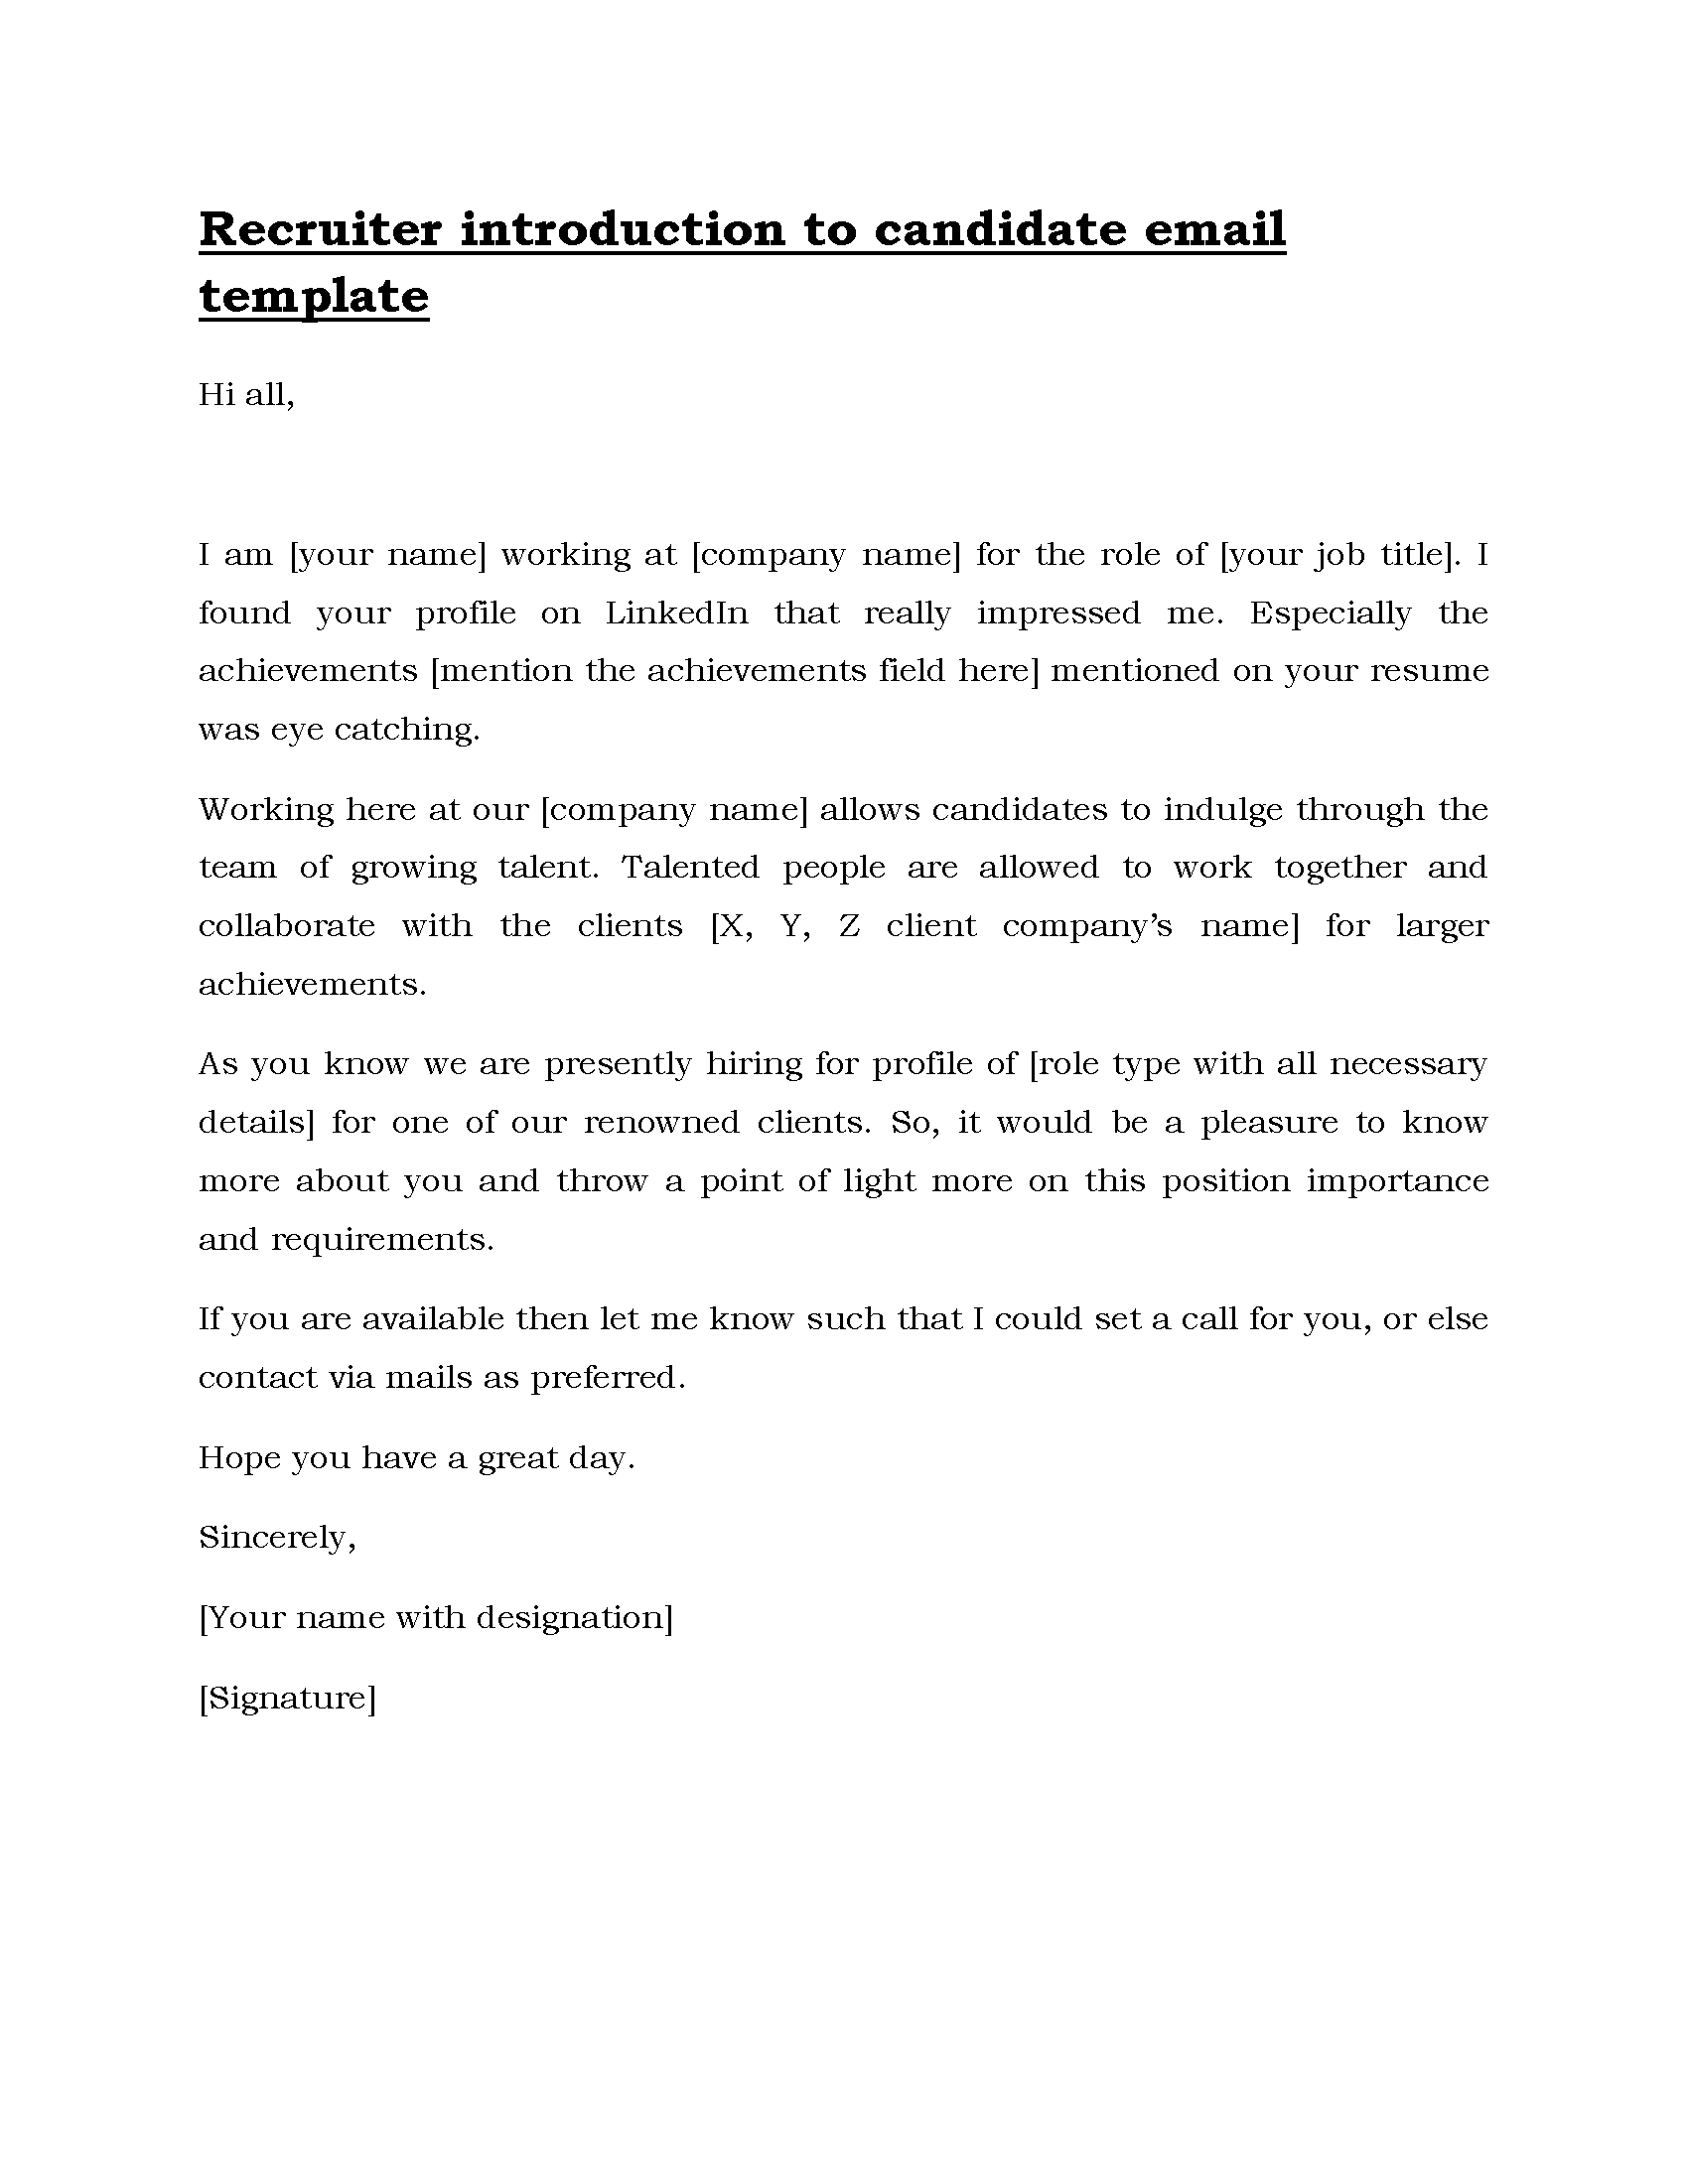 06- Recruiter-introduction-to-candidate-email-template